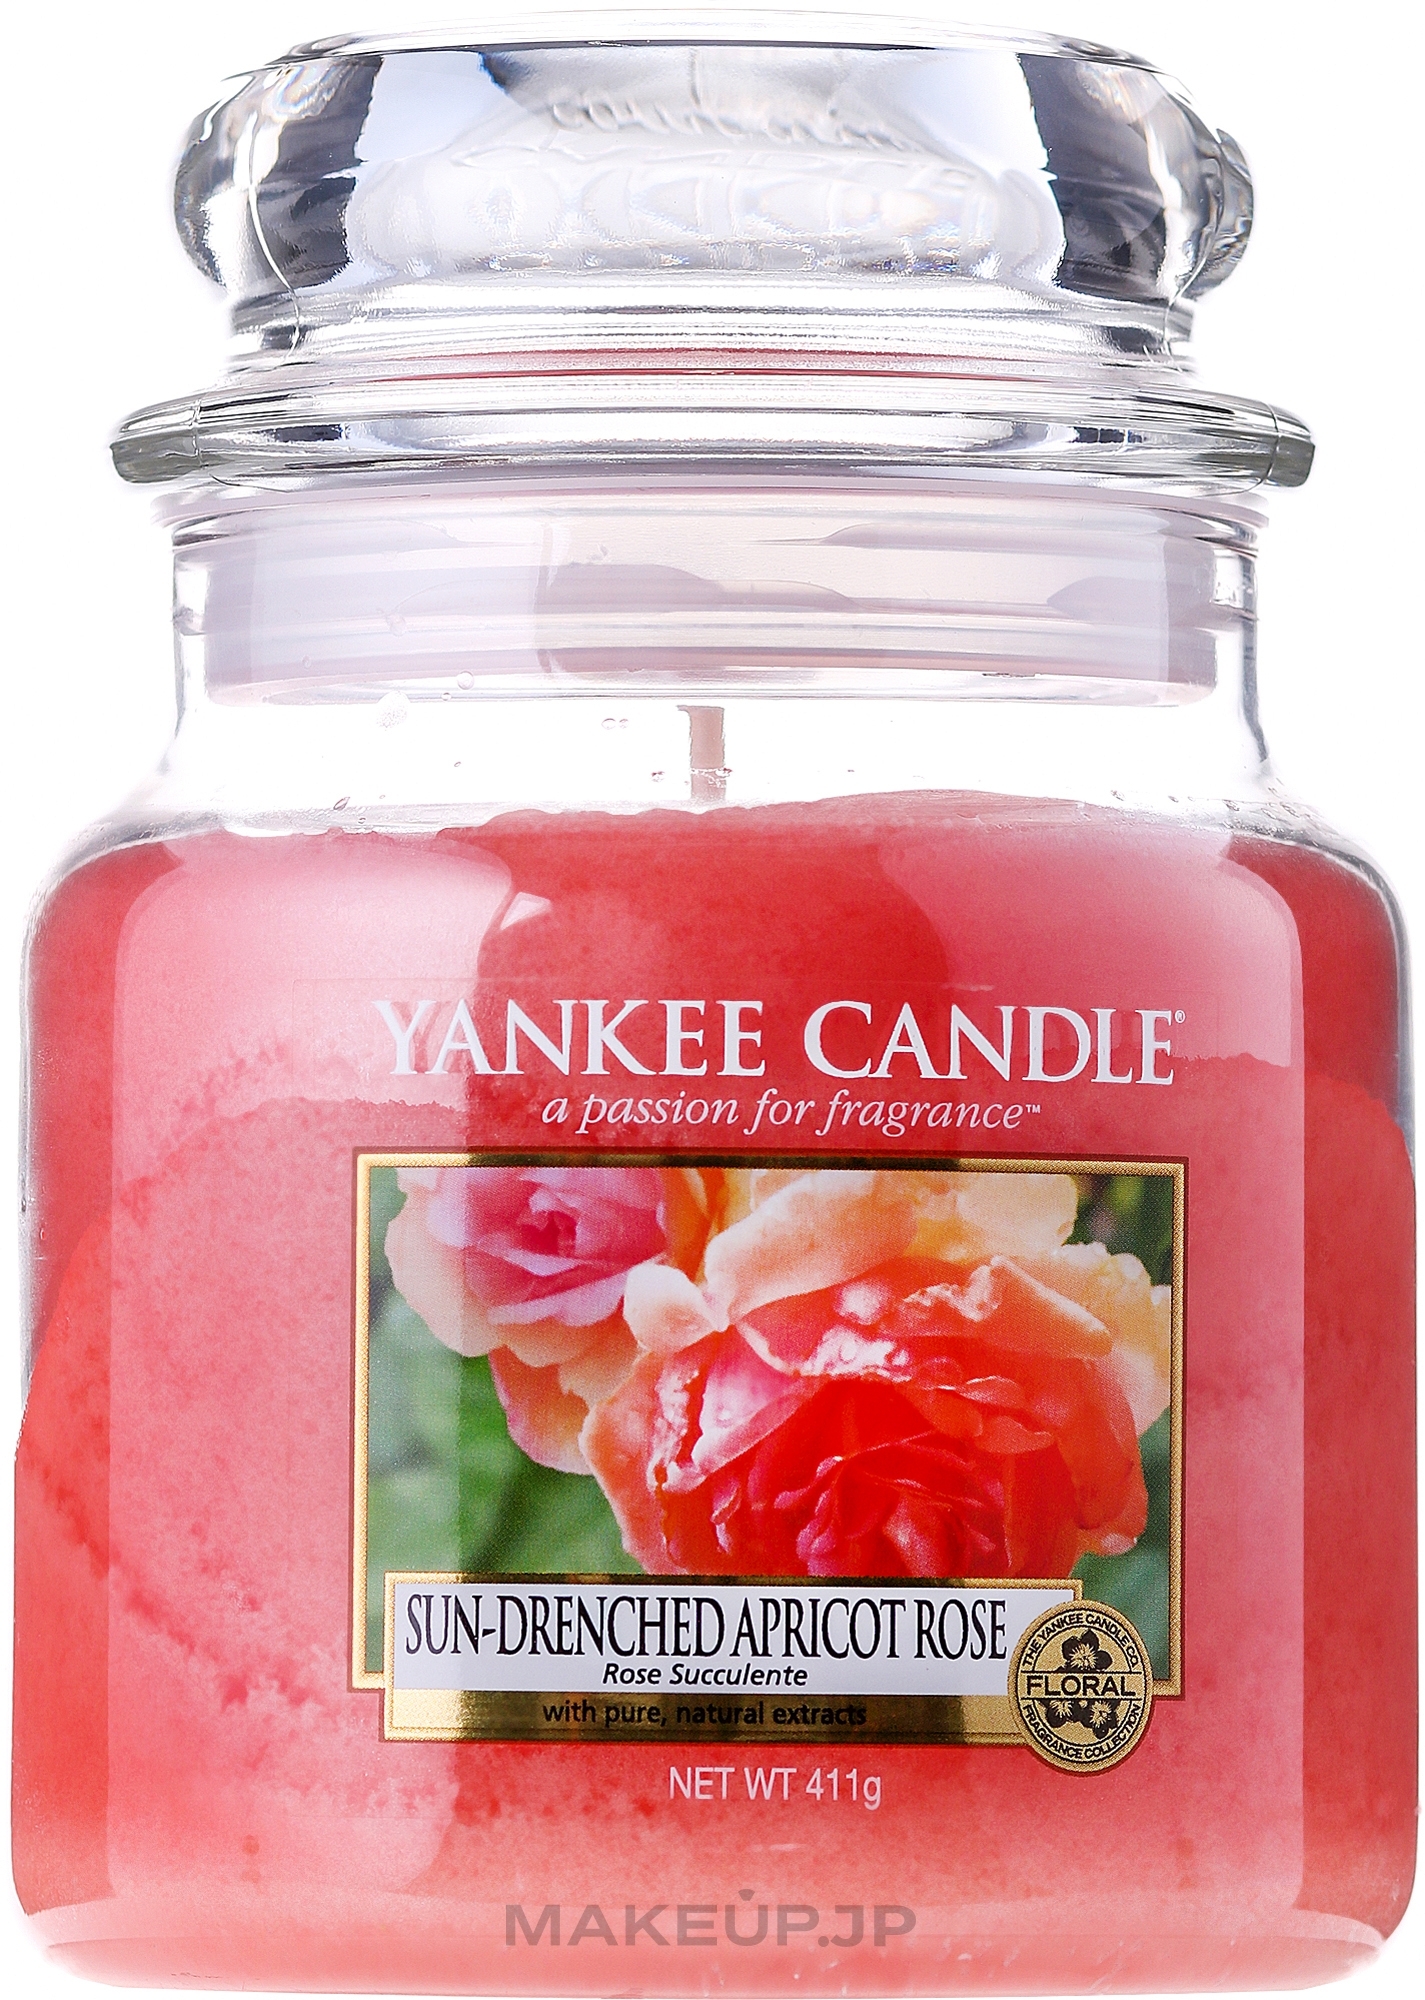 Candle in Glass Jar - Yankee Candle Sun-Drenched Apricot Rose — photo 411 g